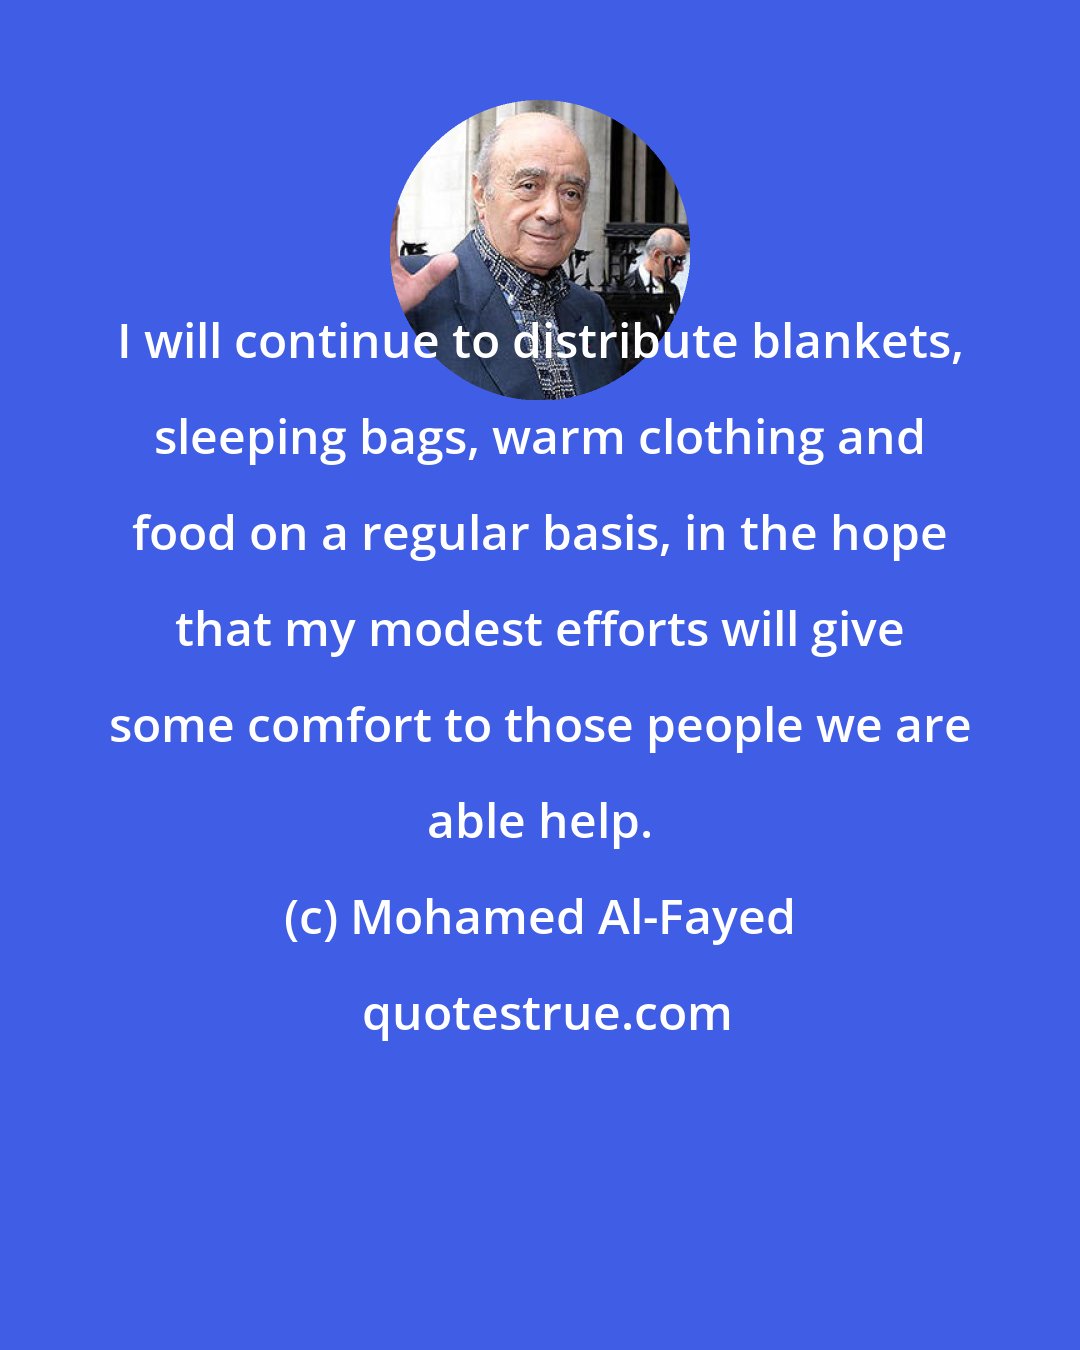 Mohamed Al-Fayed: I will continue to distribute blankets, sleeping bags, warm clothing and food on a regular basis, in the hope that my modest efforts will give some comfort to those people we are able help.